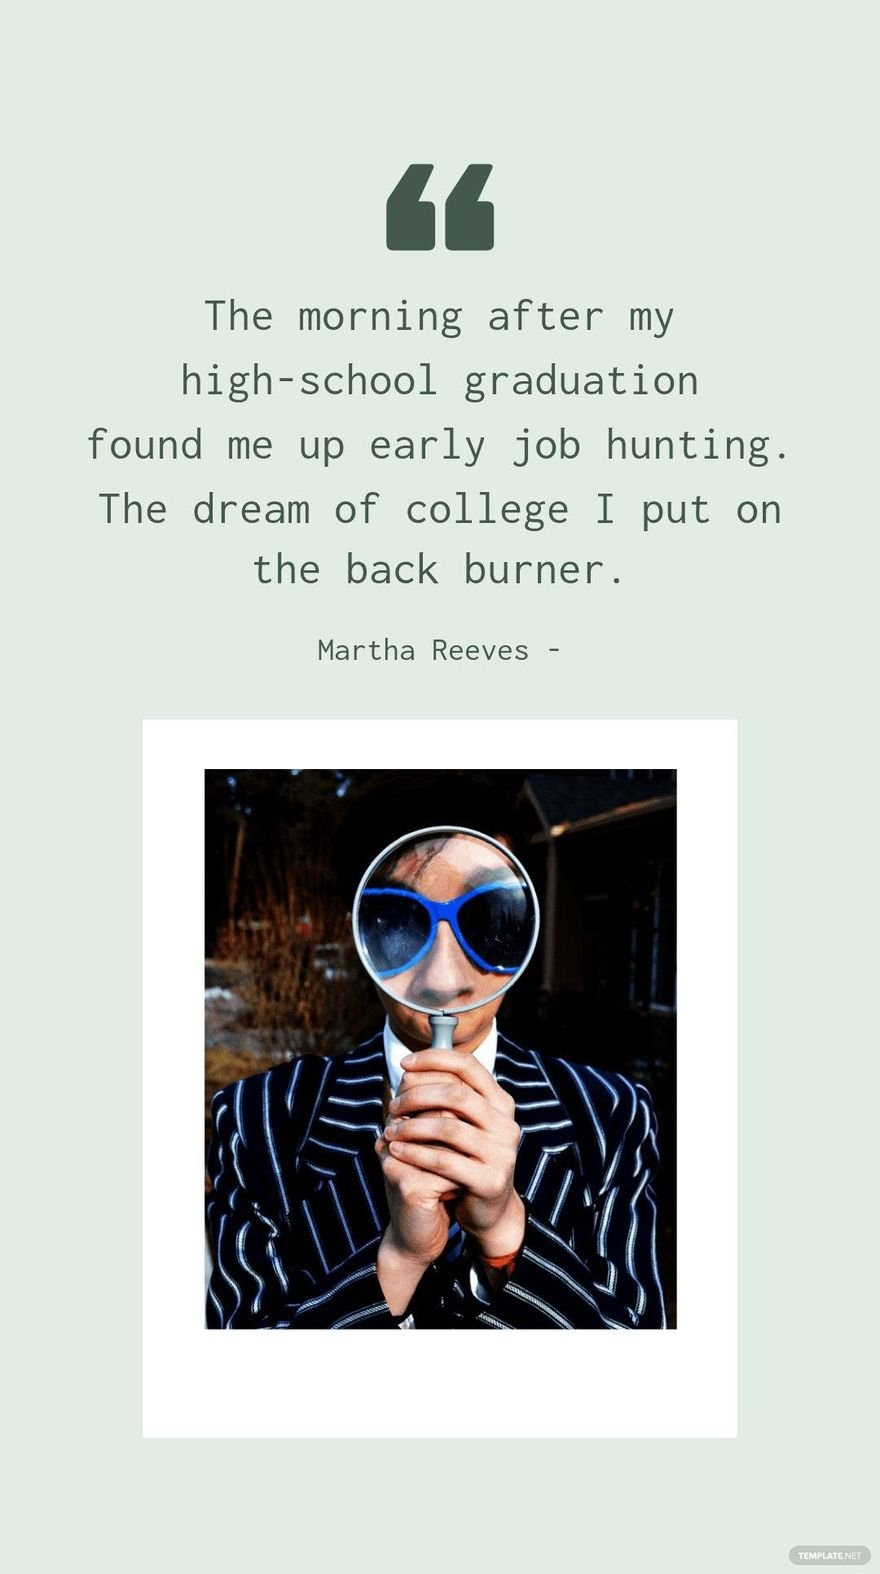 Martha Reeves - The morning after my high-school graduation found me up early job hunting. The dream of college I put on the back burner. in JPG